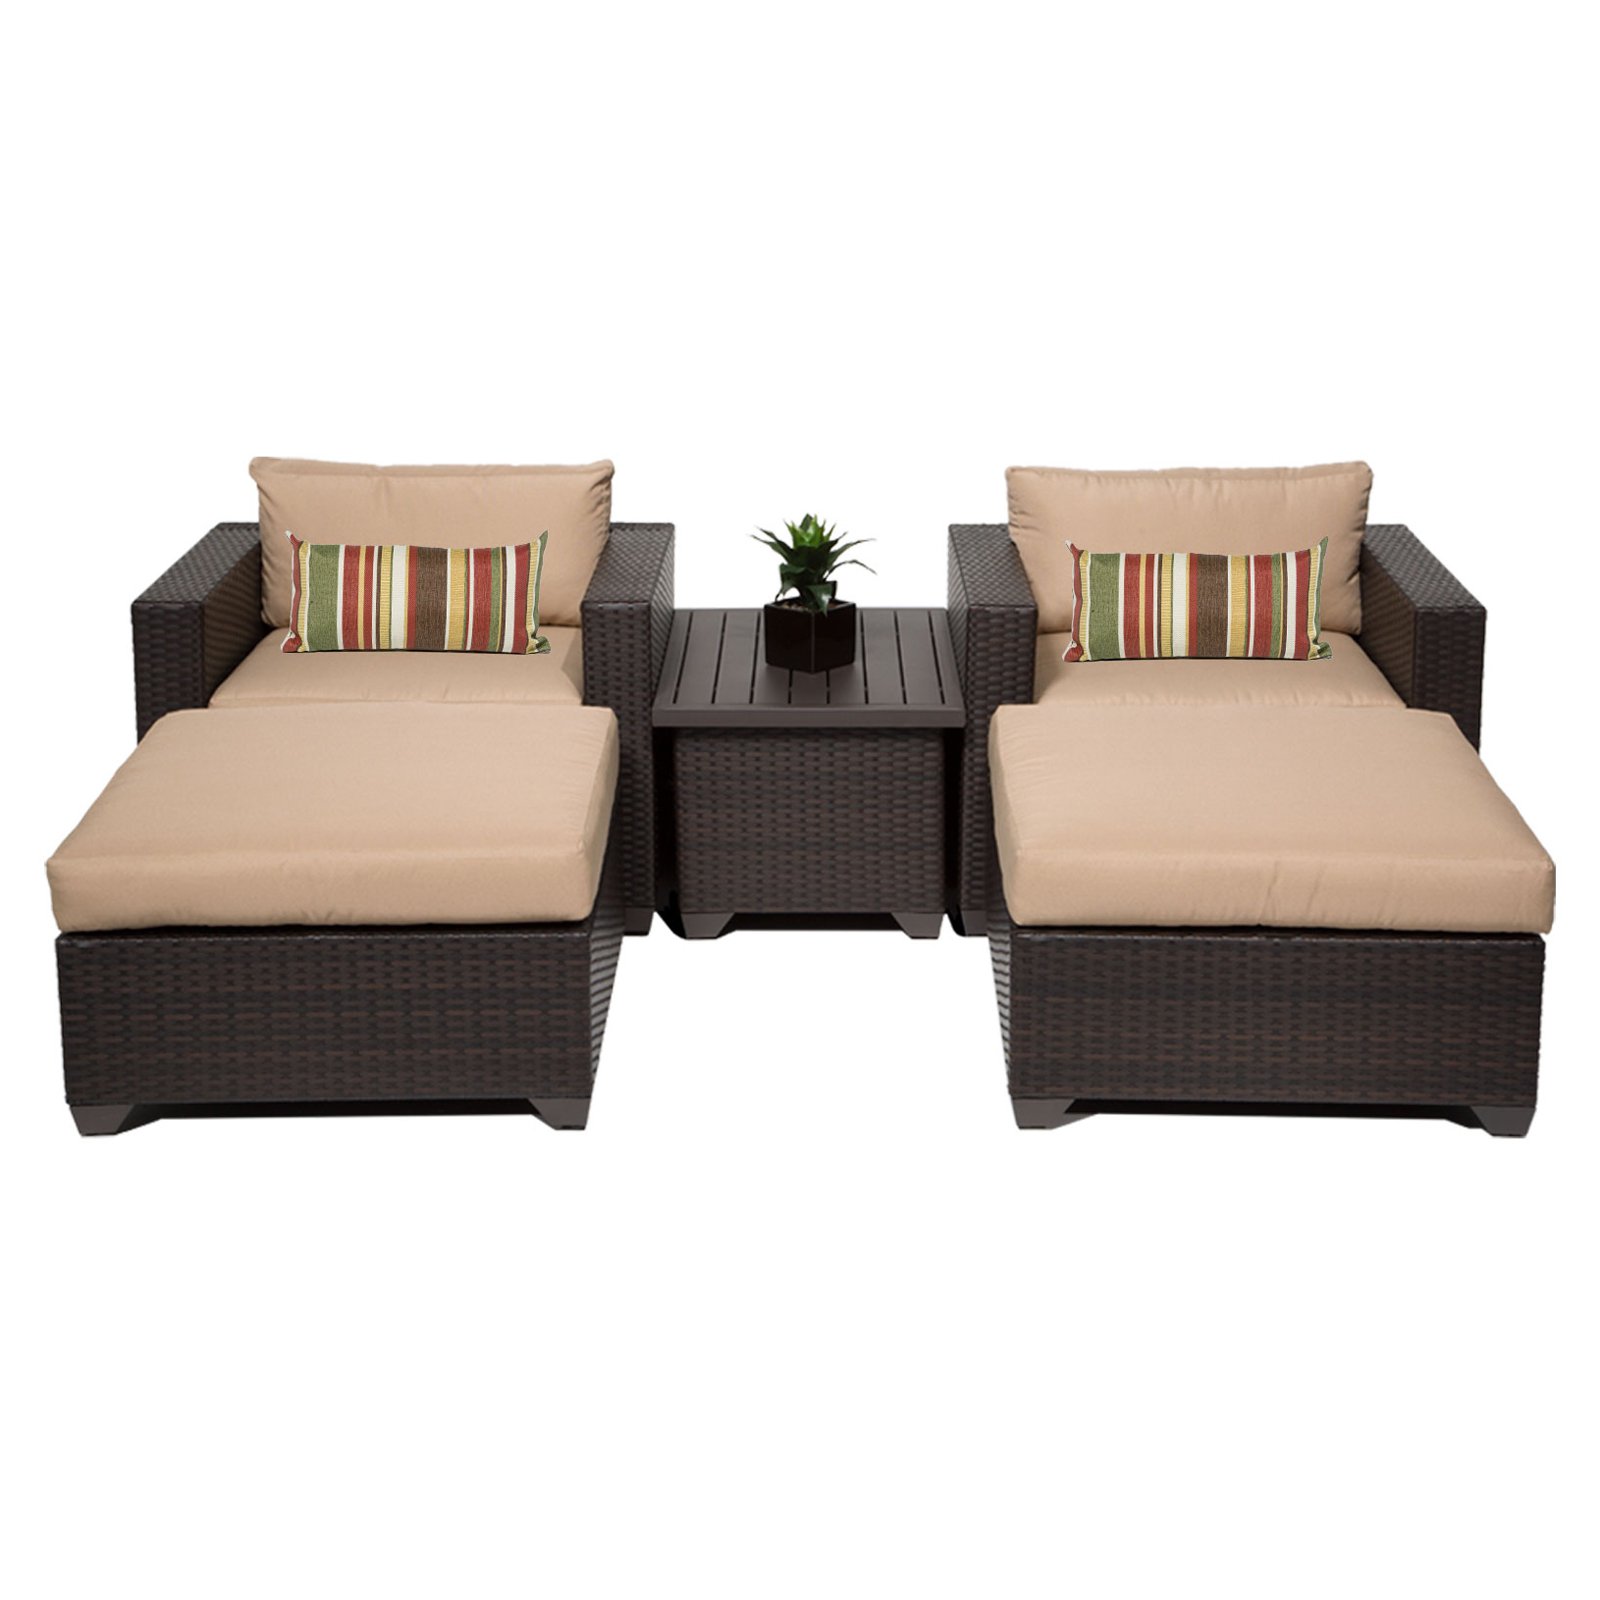 TK Classics Belle Wicker 5 Piece Patio Conversation Set with Ottoman and 2 Sets of Cushion Covers - image 1 of 2